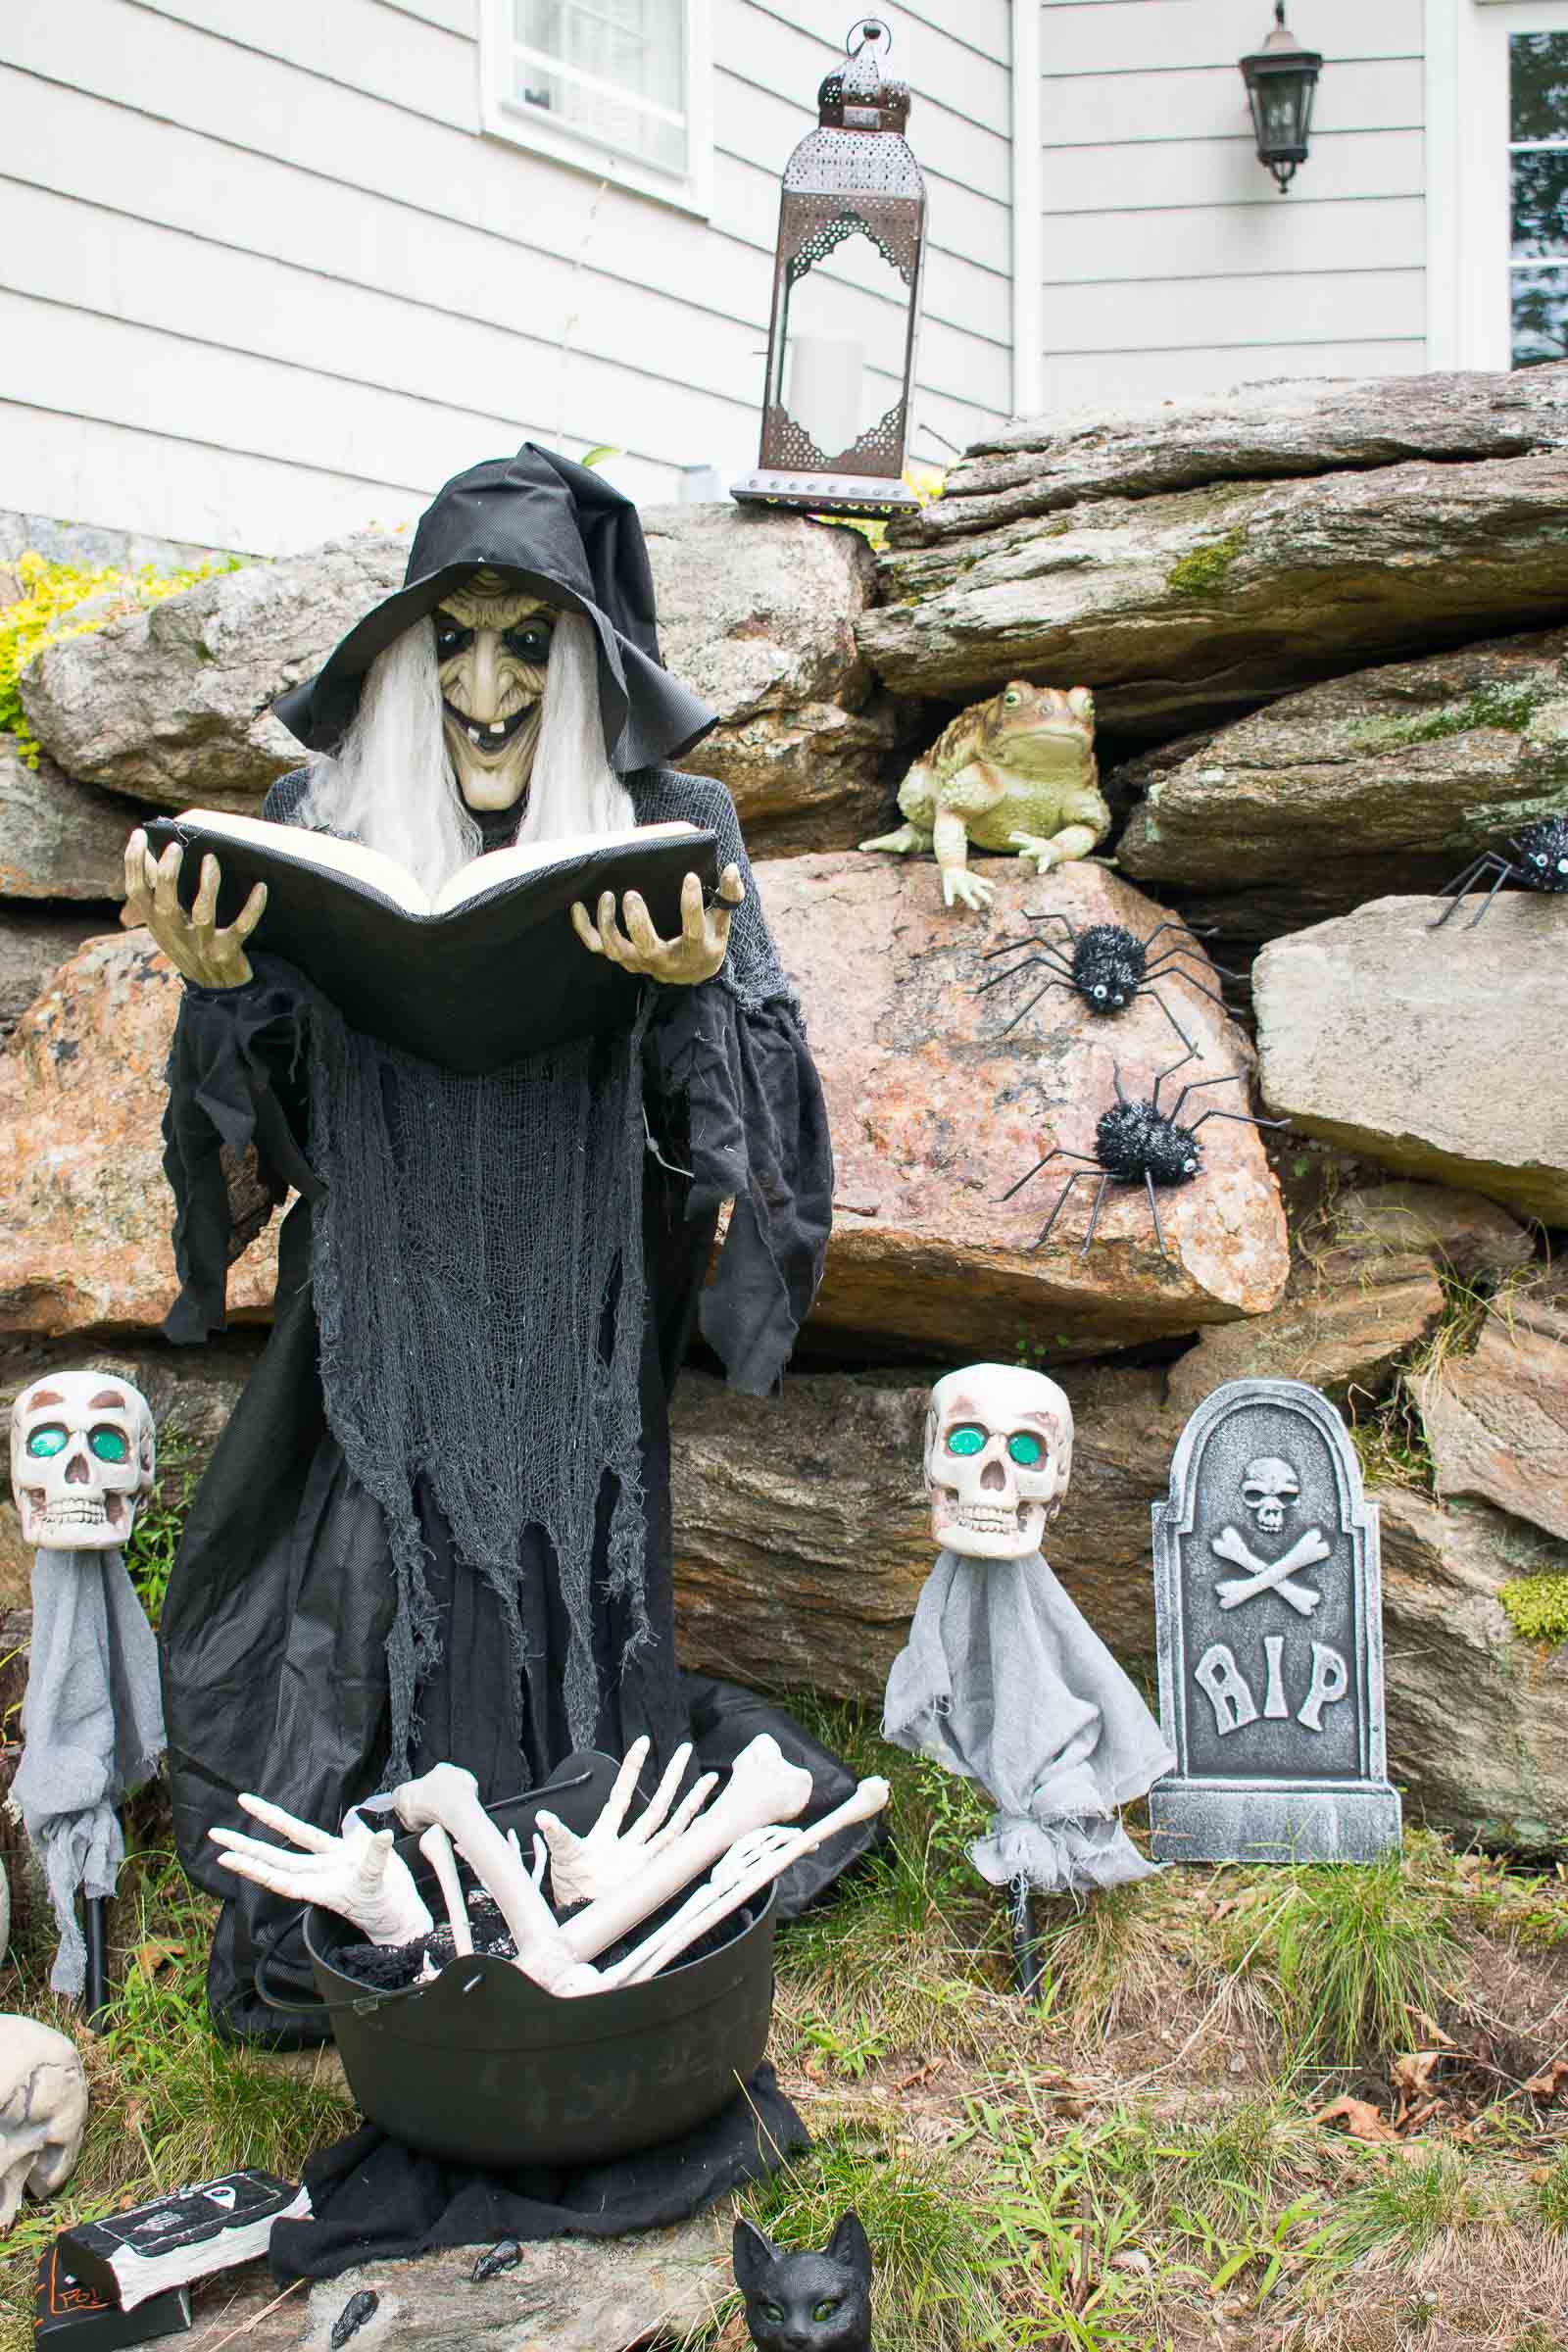 Spooky Outdoor Halloween Decorations - At Charlotte's House